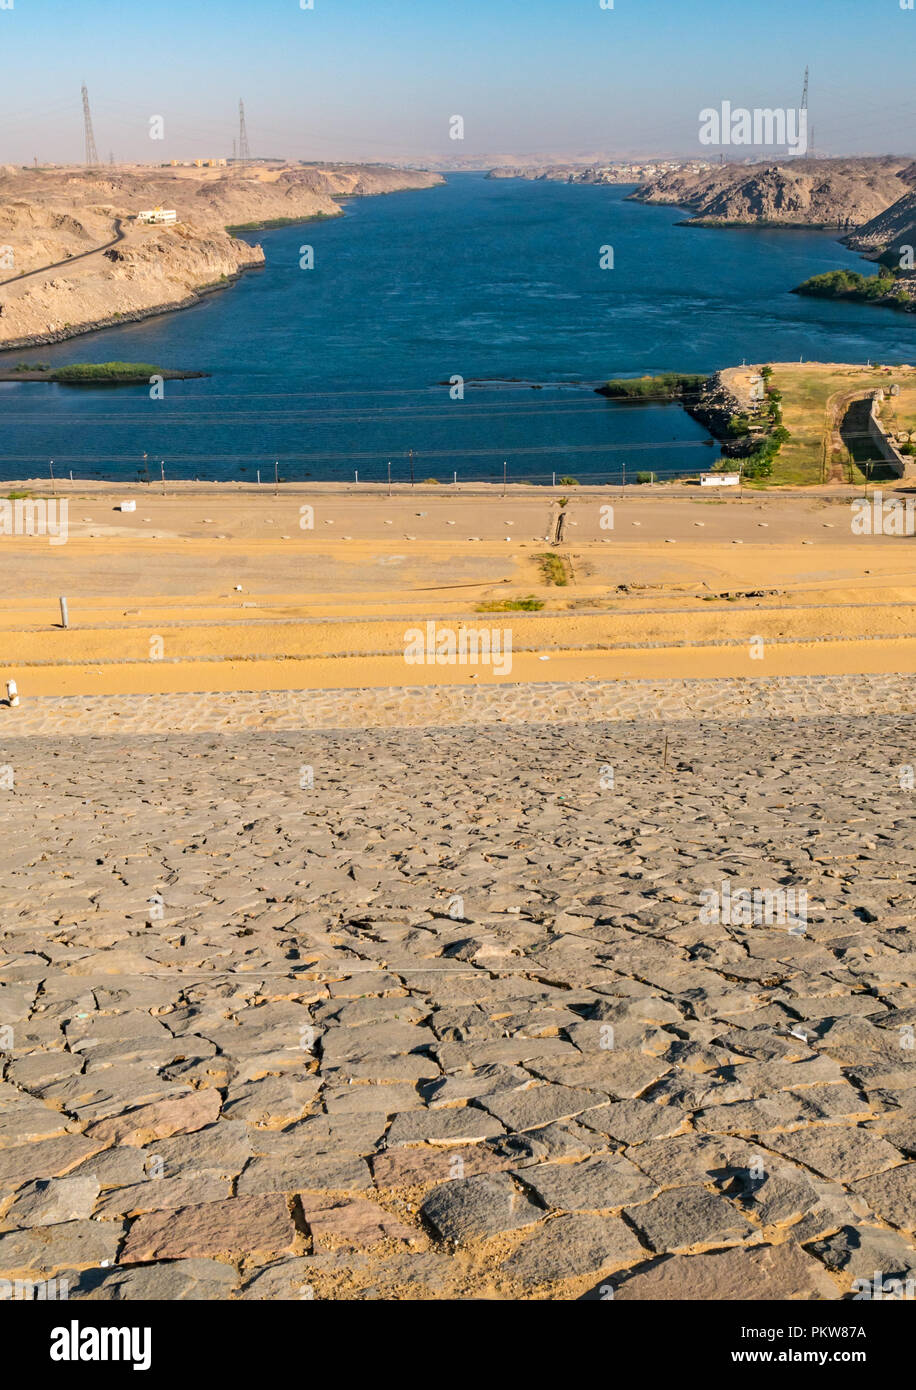 Looking down Nile River from top of Aswan High Dam, River Nile, Aswan, Egypt, Africa Stock Photo